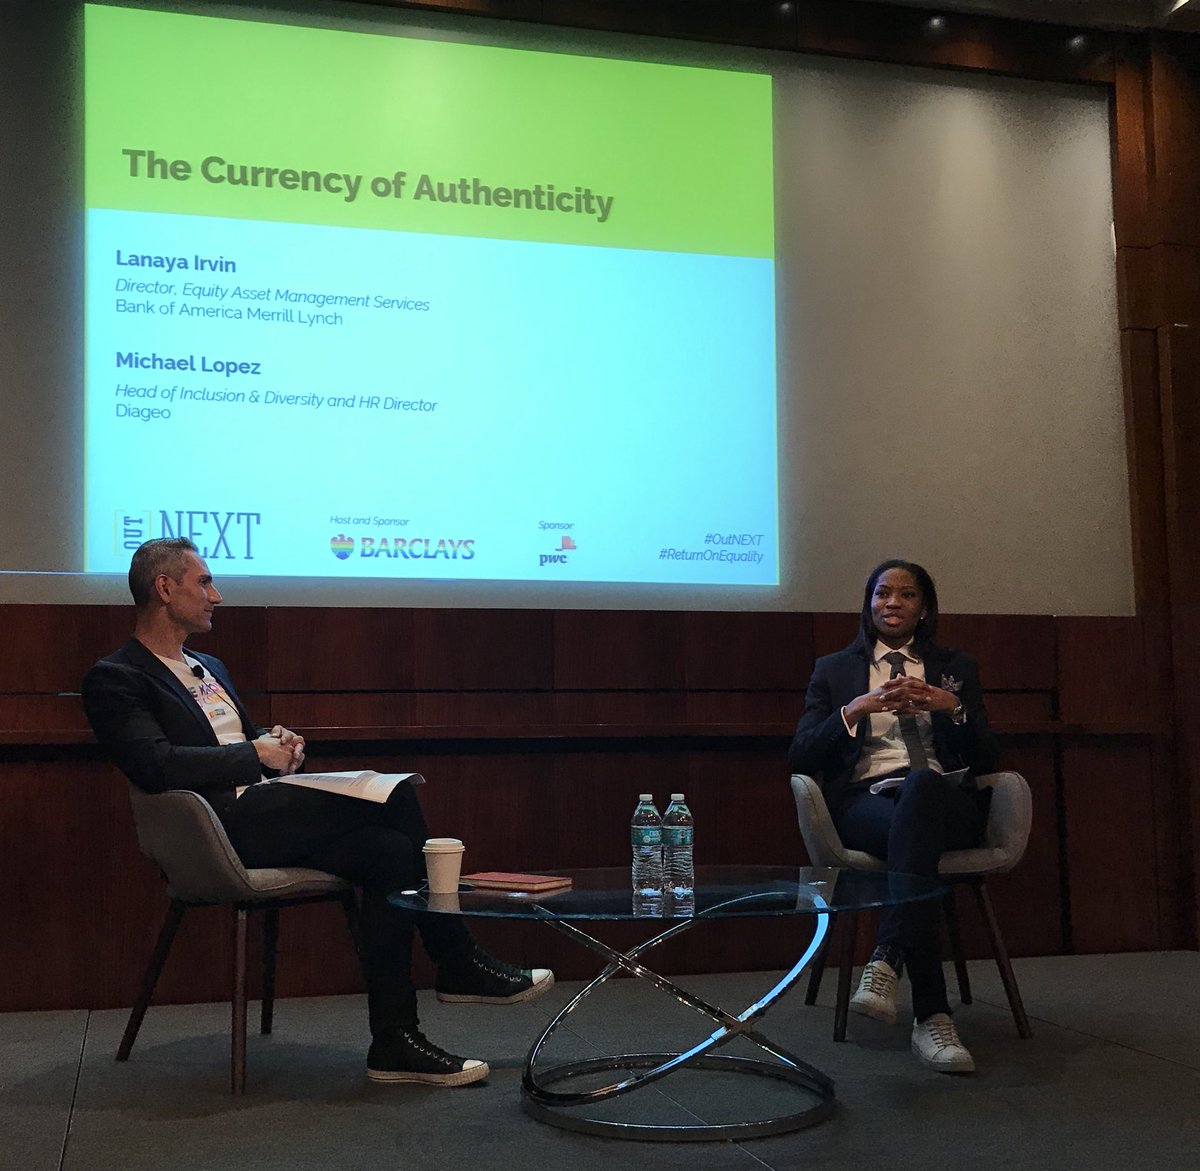 The currency of authenticity, and importance to have visibility and inclusivity within corporations. @OutLeadership #OutNEXT #ReturnOnEquality #lgbt #Equality